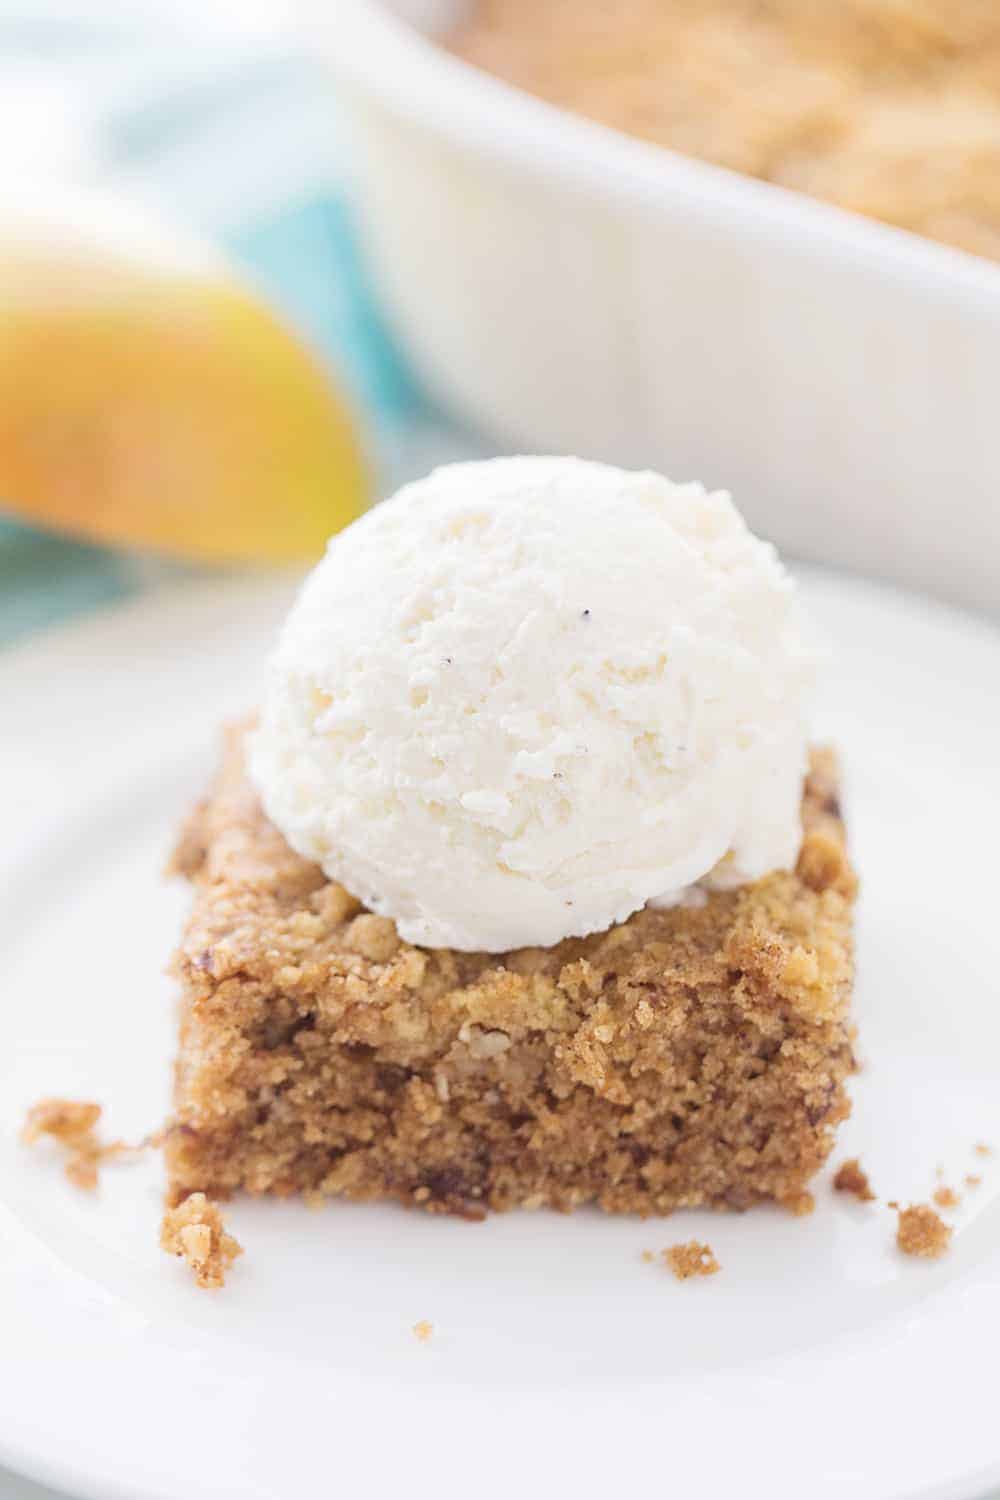 Applesauce Crunch Cake - There's applesauce cake and then there's applesauce CRUNCH cake. Why go for ordinary when you can opt for extraordinary with a crunchy topping? #cake #dessert #applesaucecake #easyrecipe #baking #sweets #easycake #cakerecipe #HalfScratched